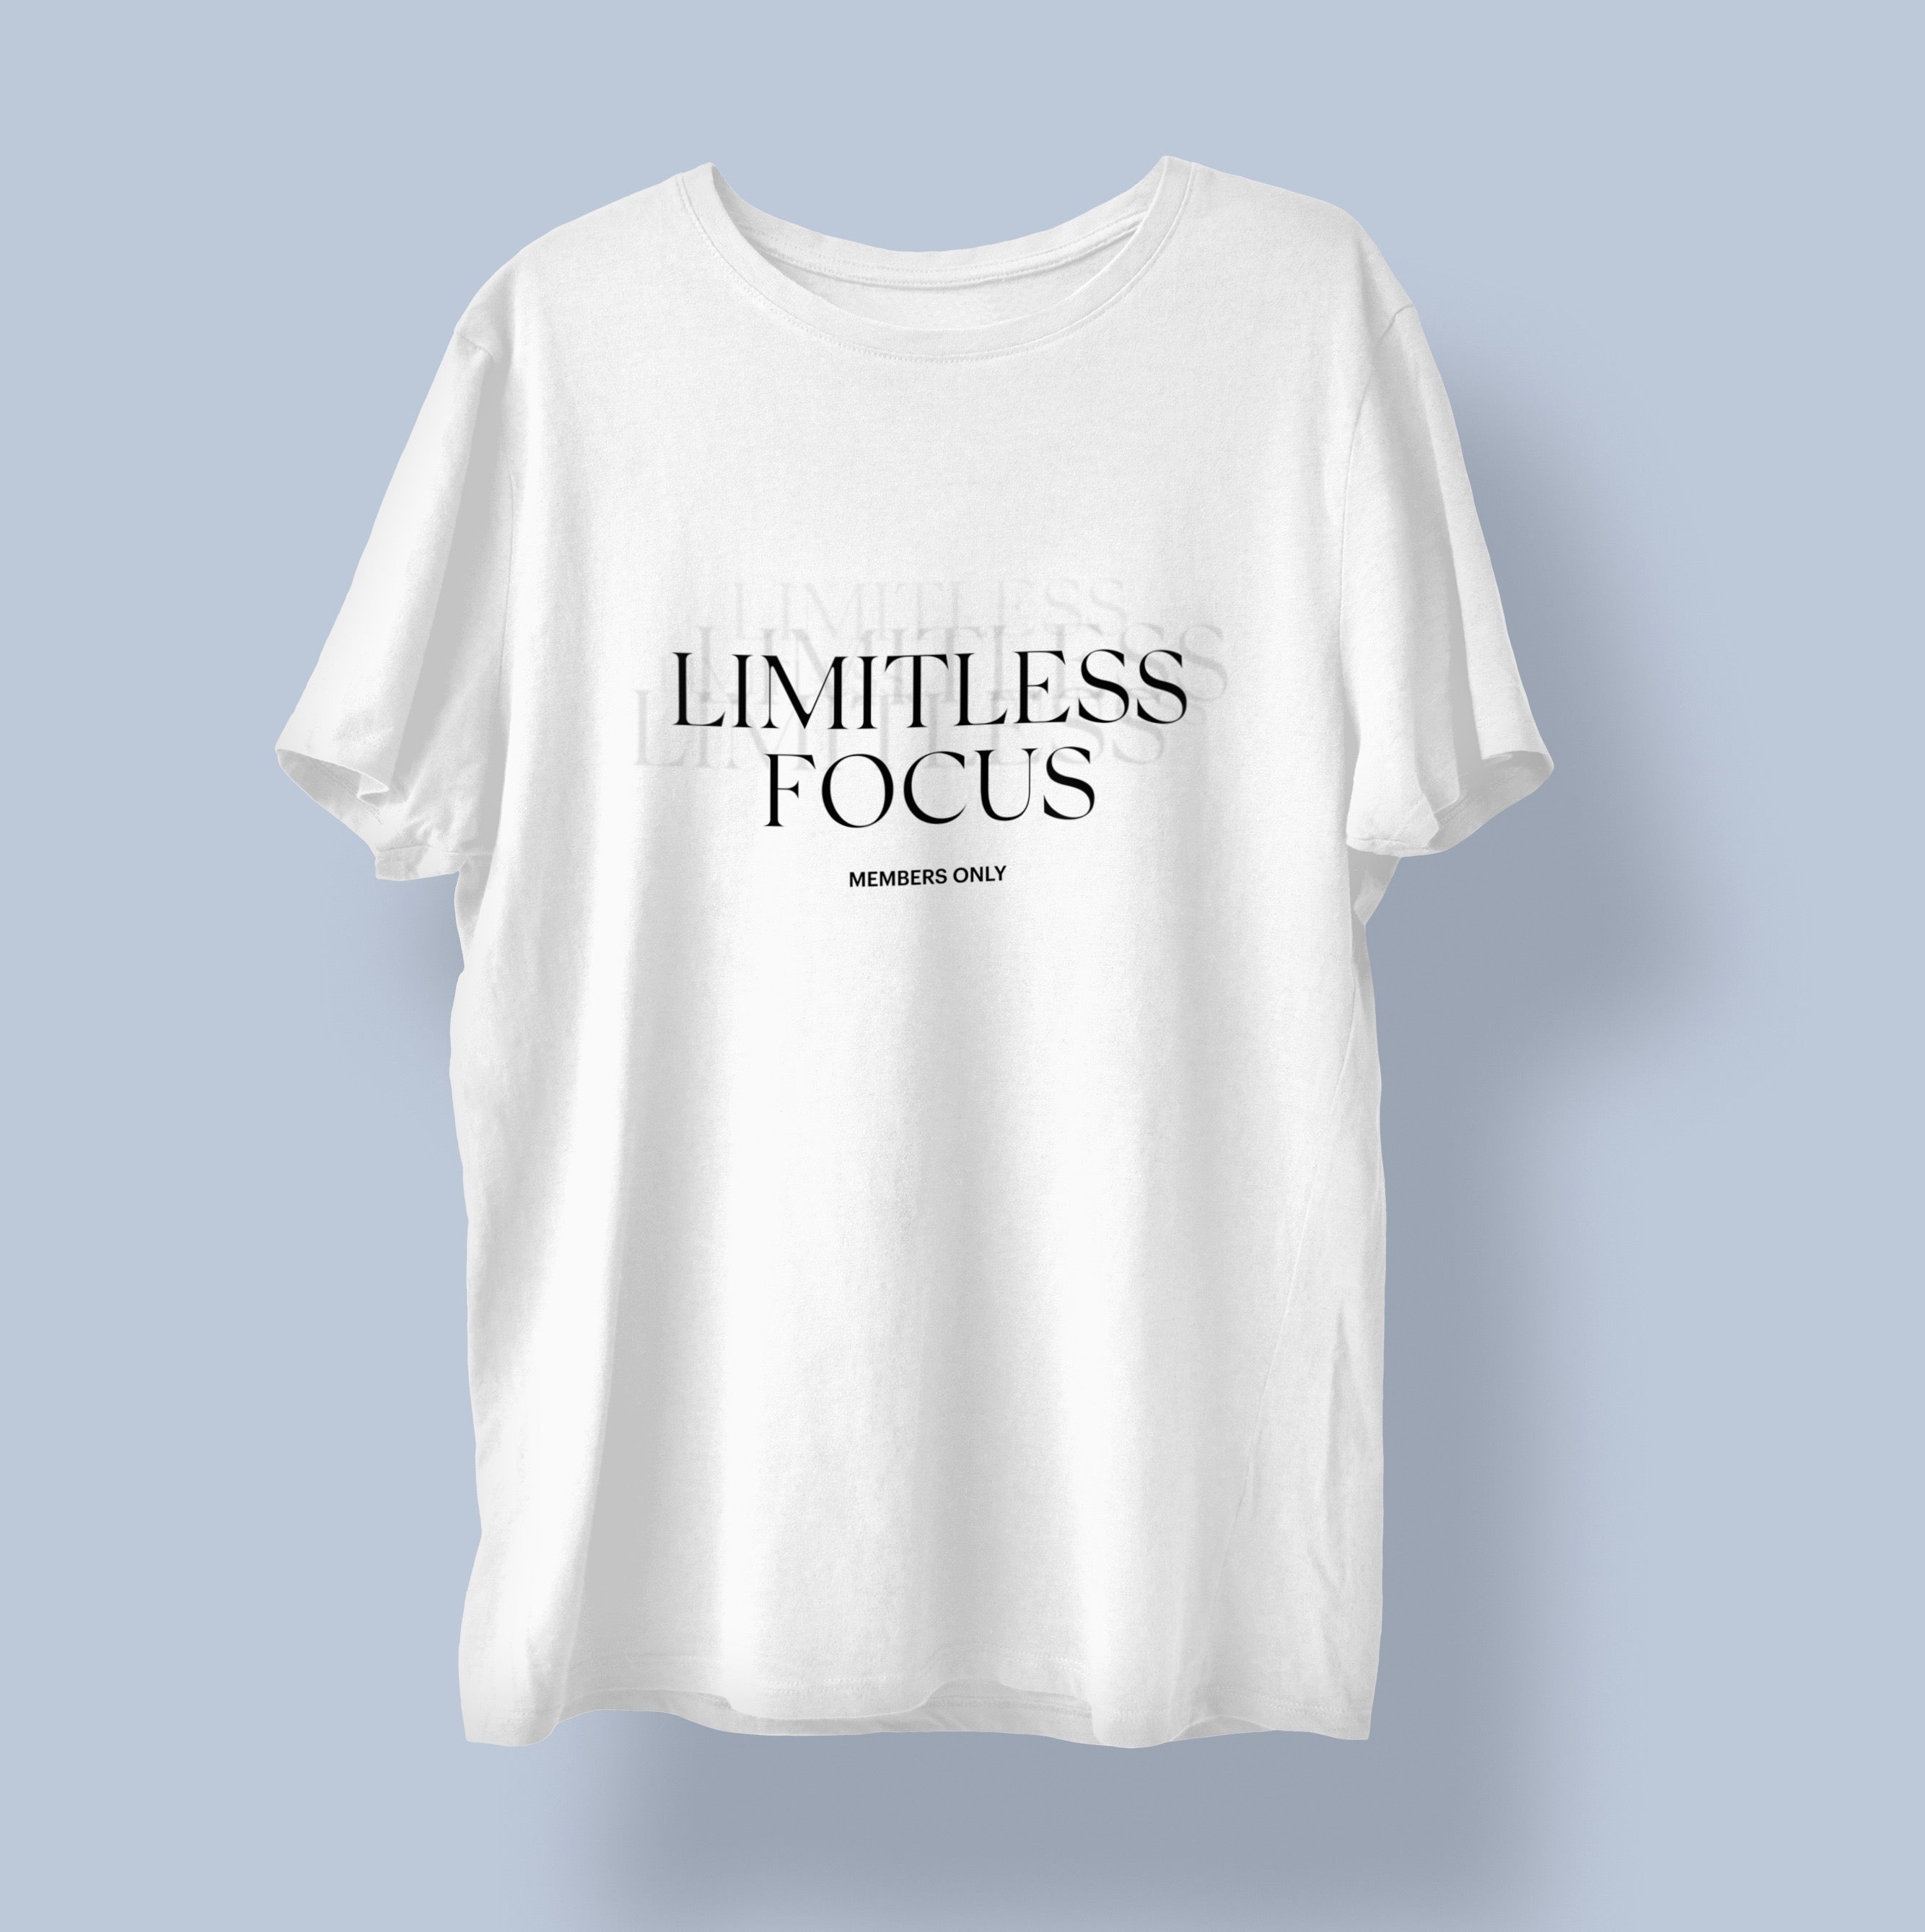 Limitless Focus "Members Only" Shirt